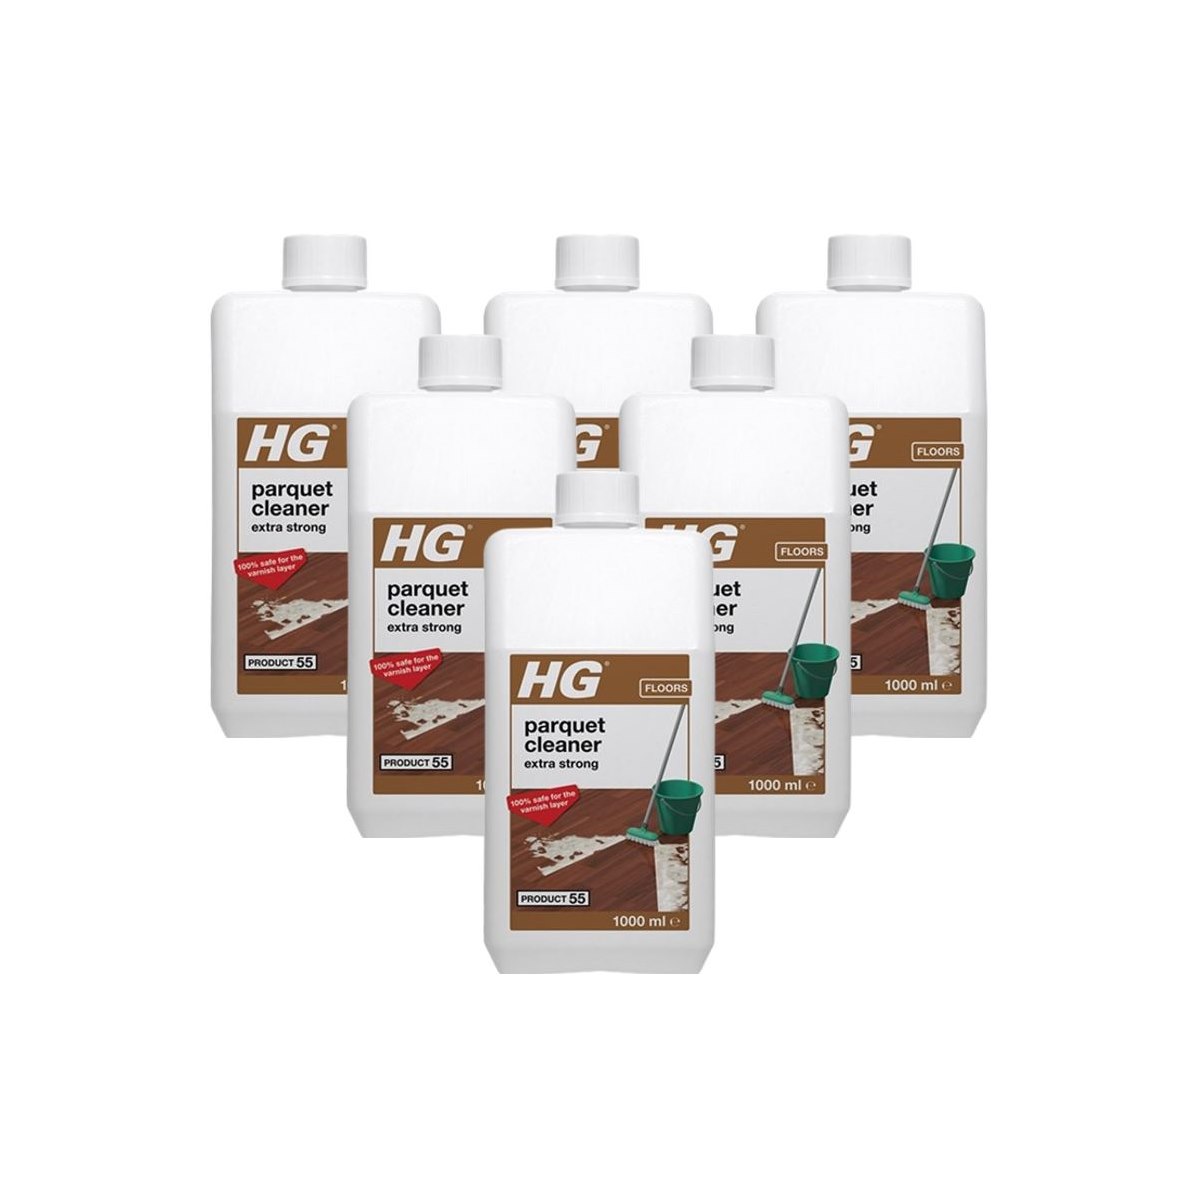 Case of 6 x HG Parquet Cleaner Extra Strong (Product 55) 1 Litre